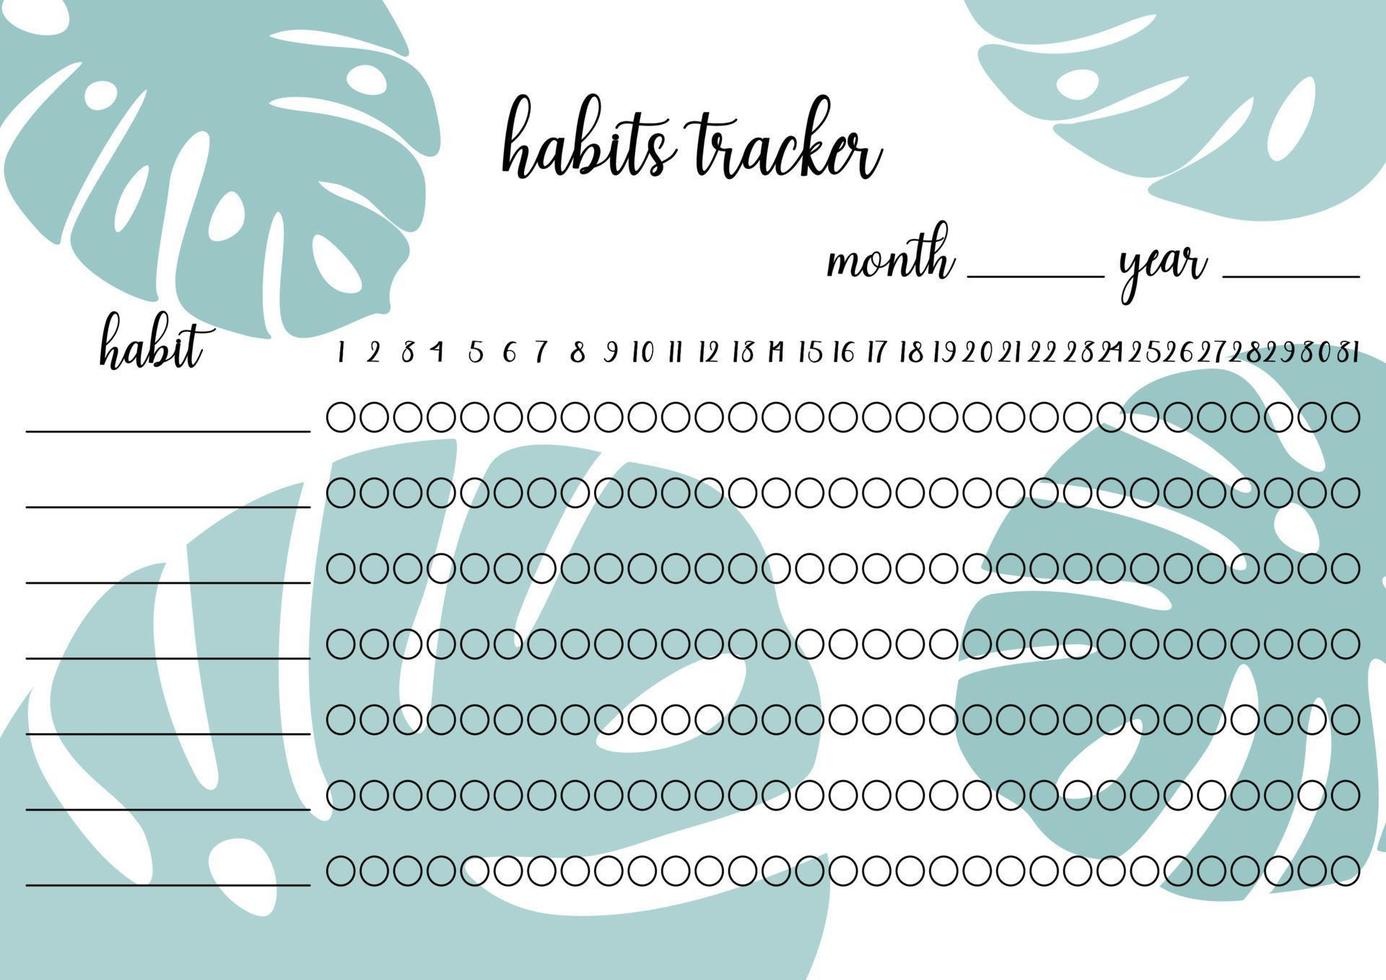 Habits tracker blank printable template. Notebook page horizontal A4. Vector illustration of paper sheet for marking habits success in month. Tropical monstera leaves background